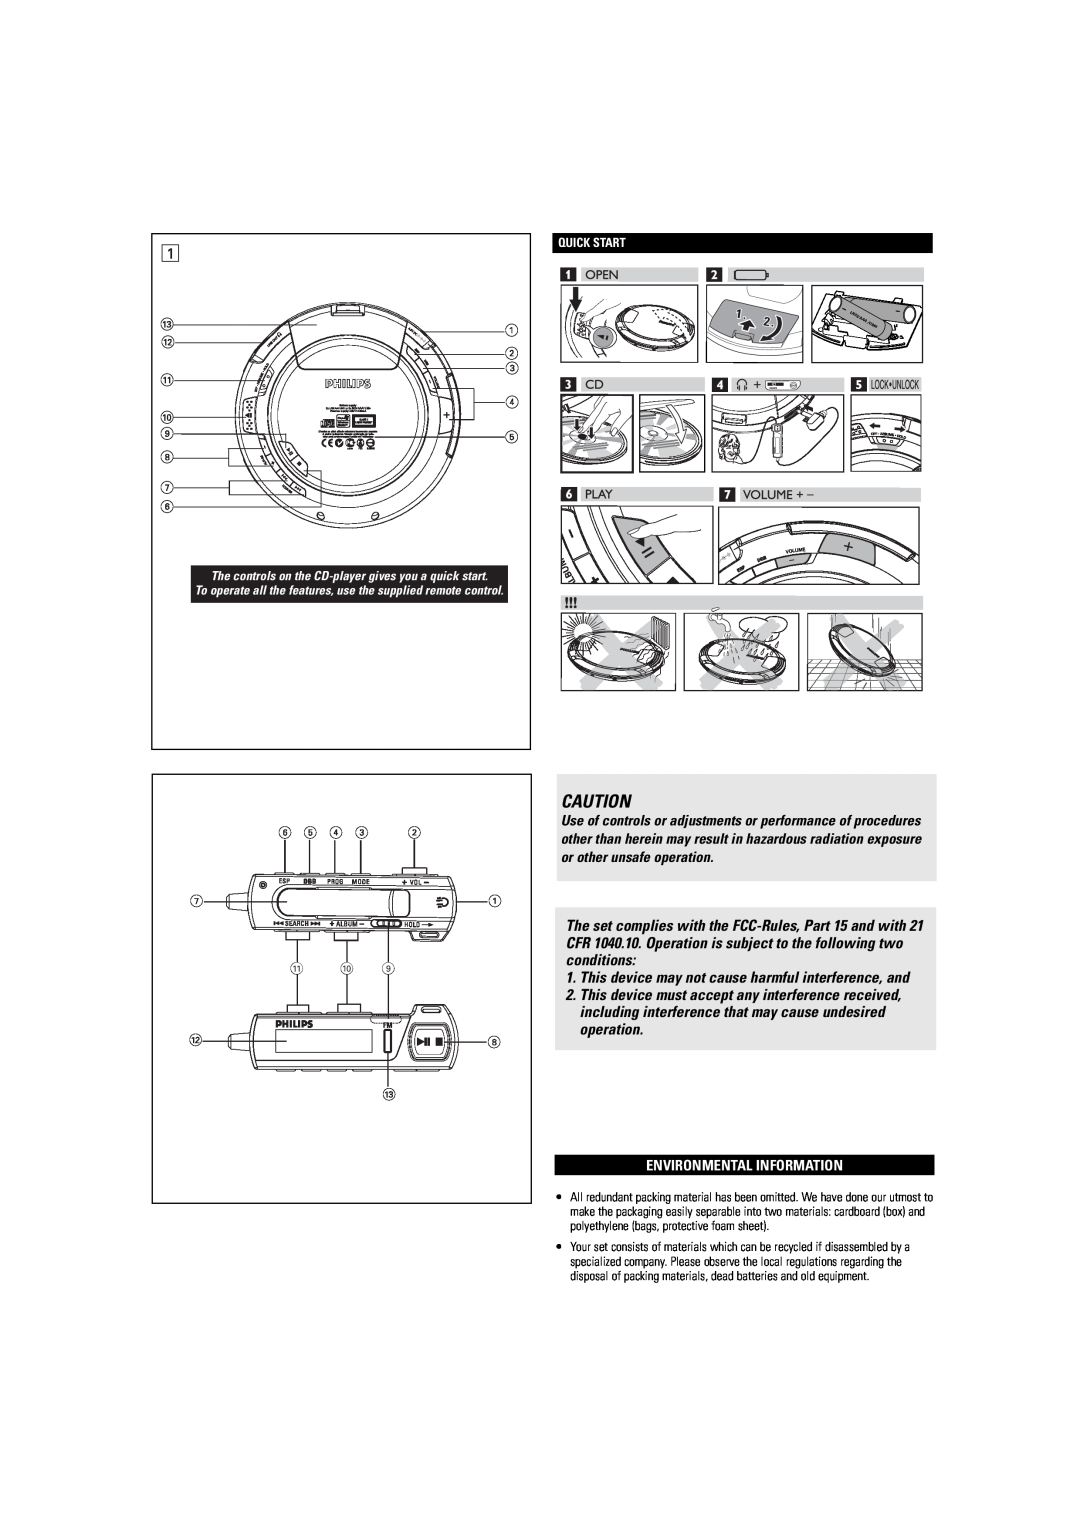 Philips EXP3483 user manual Environmental Information, This device may not cause harmful interference, and 